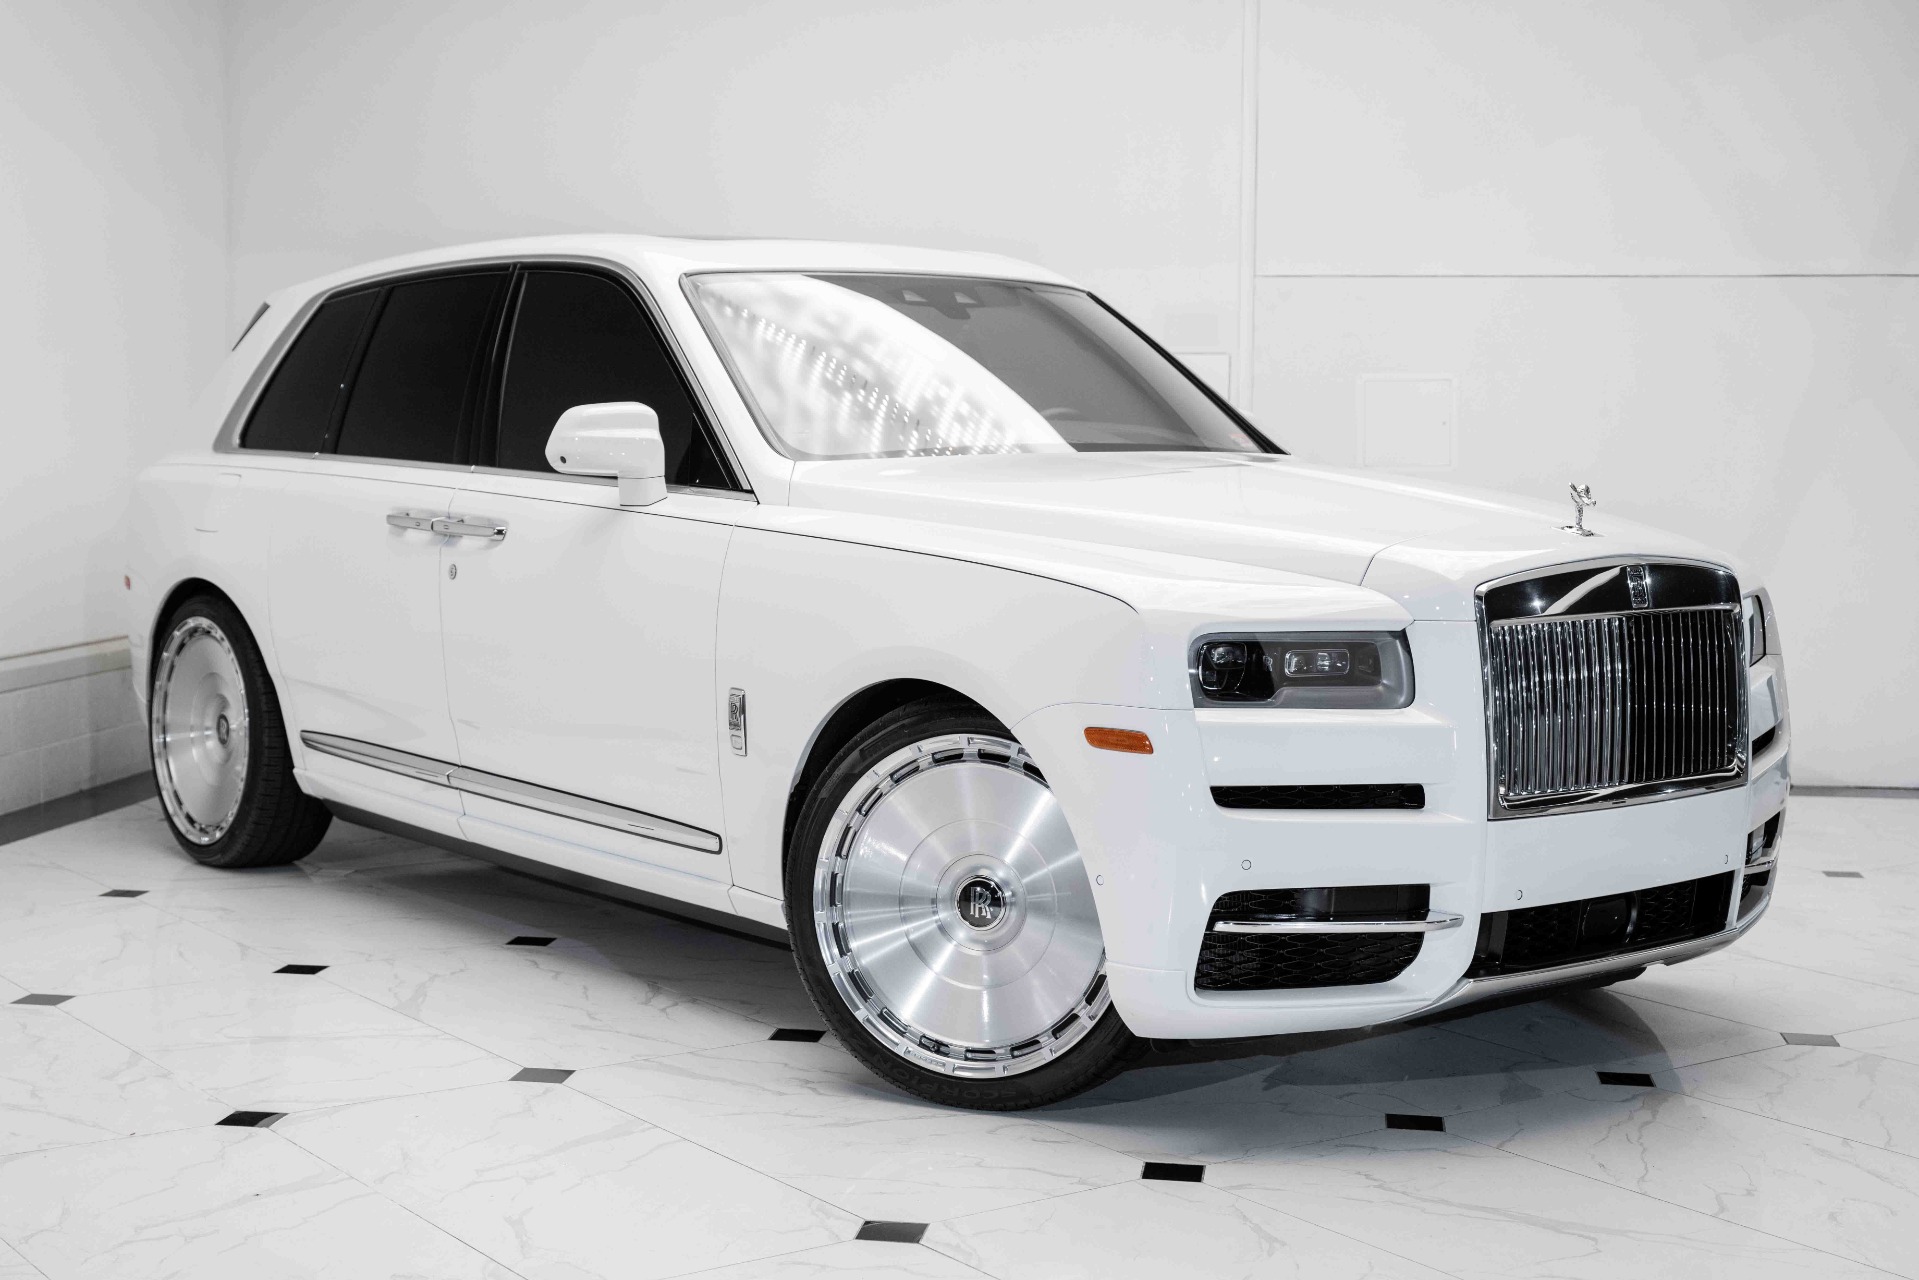 Pre-Owned 2019 Rolls-Royce Cullinan For Sale (Special Pricing)